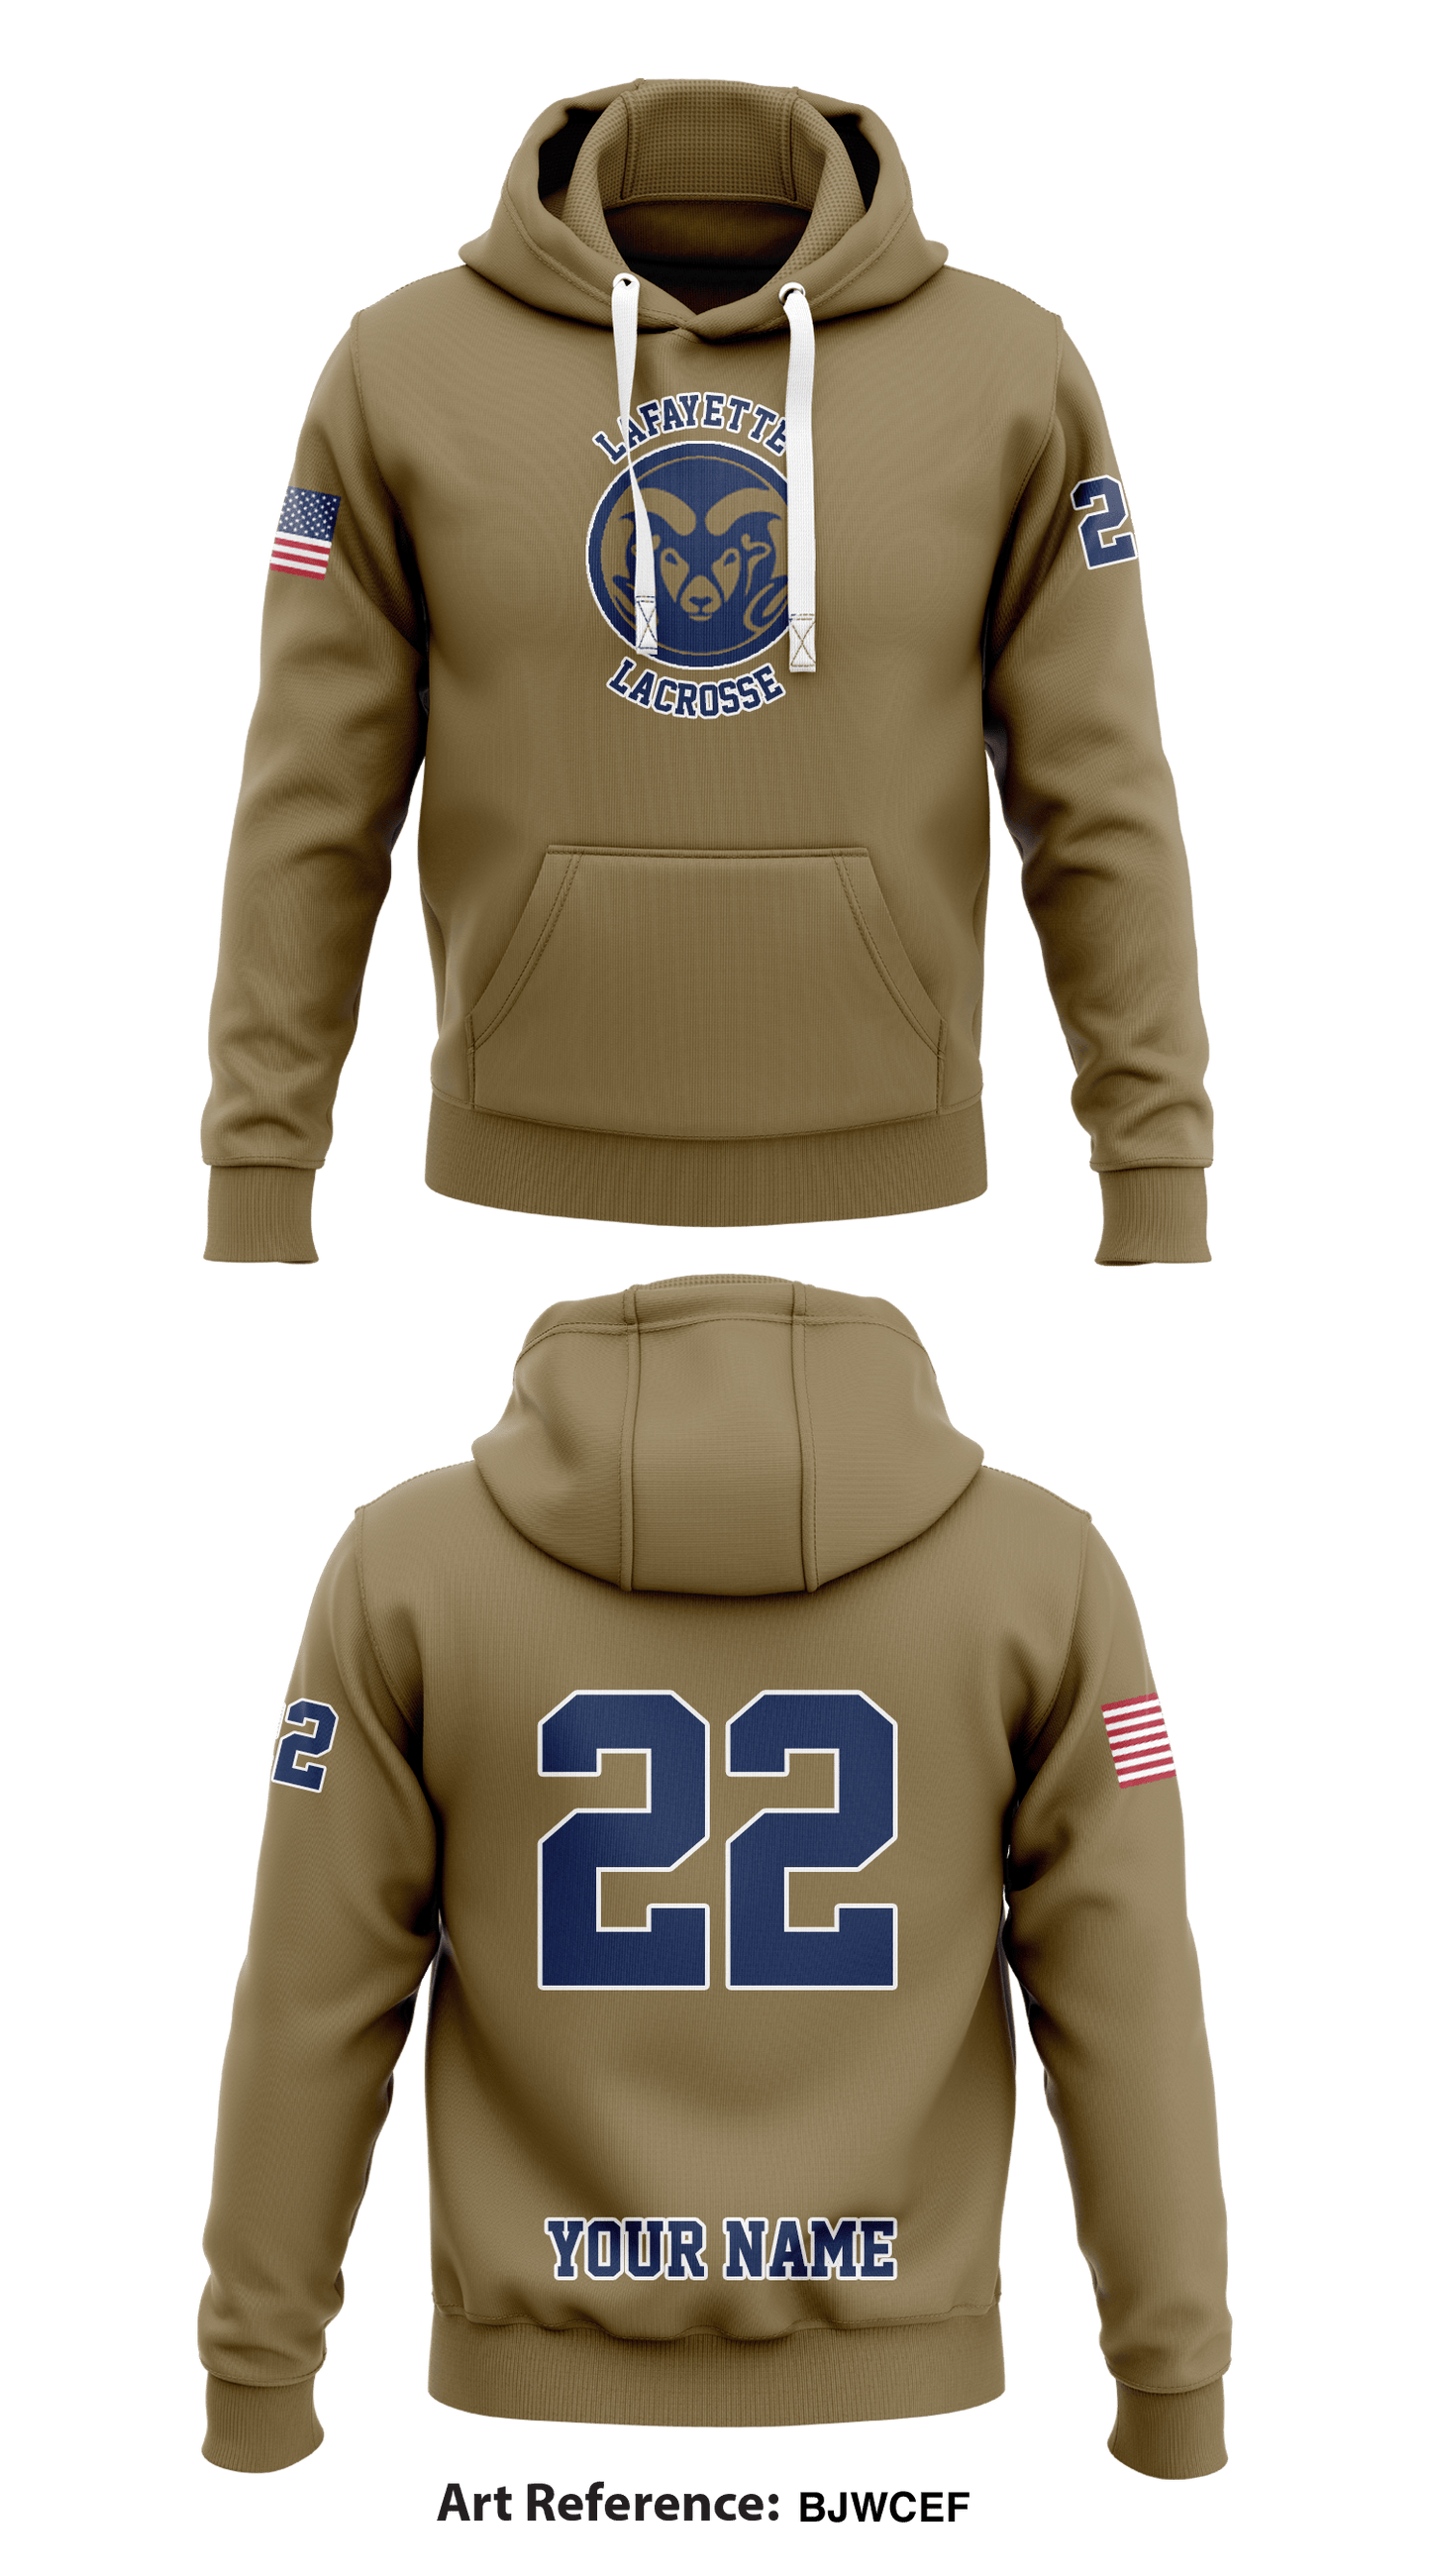 rams store nfl